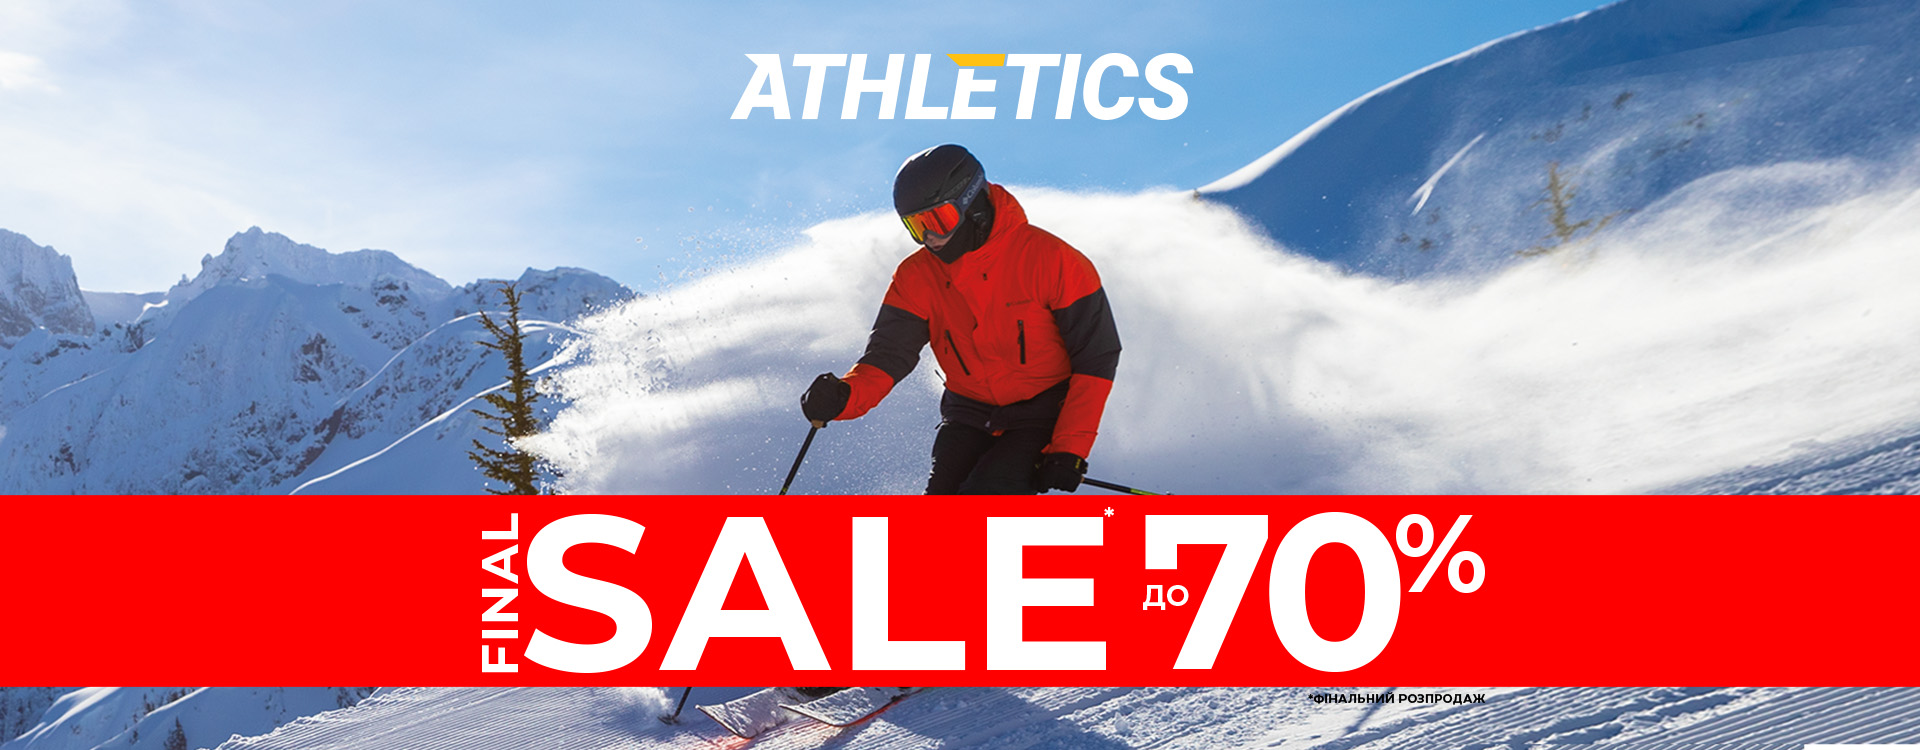 ATHLETICS winter sale up to 70% off